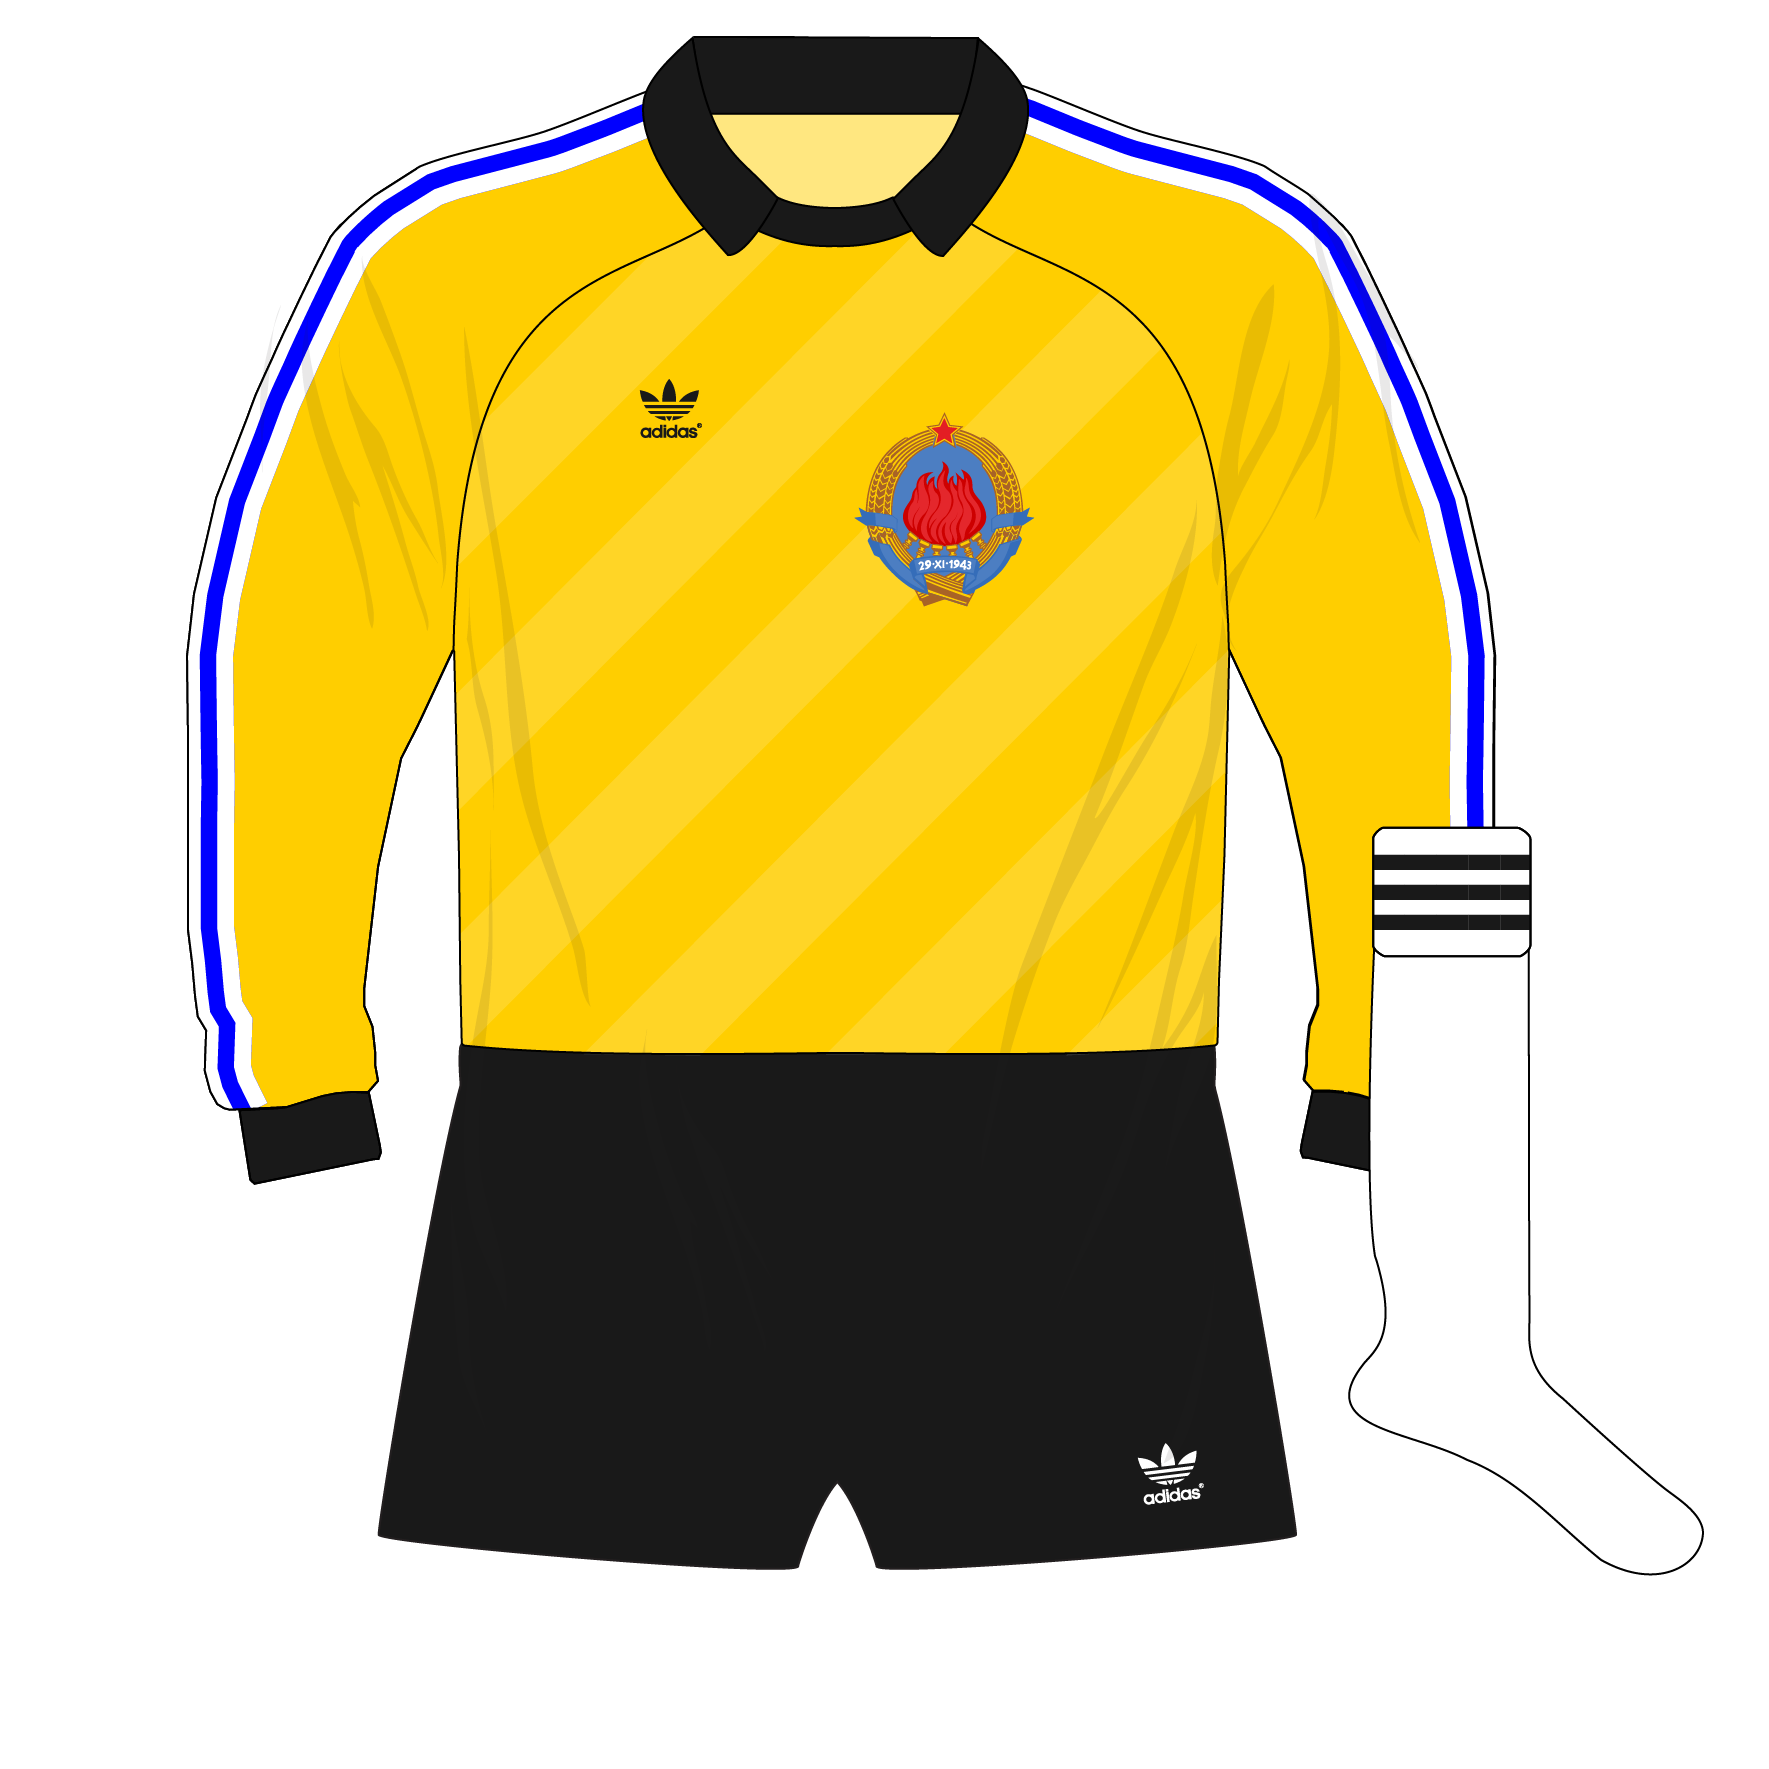 Goalkeeper kit designs in the 1990s were on another level - ESPN